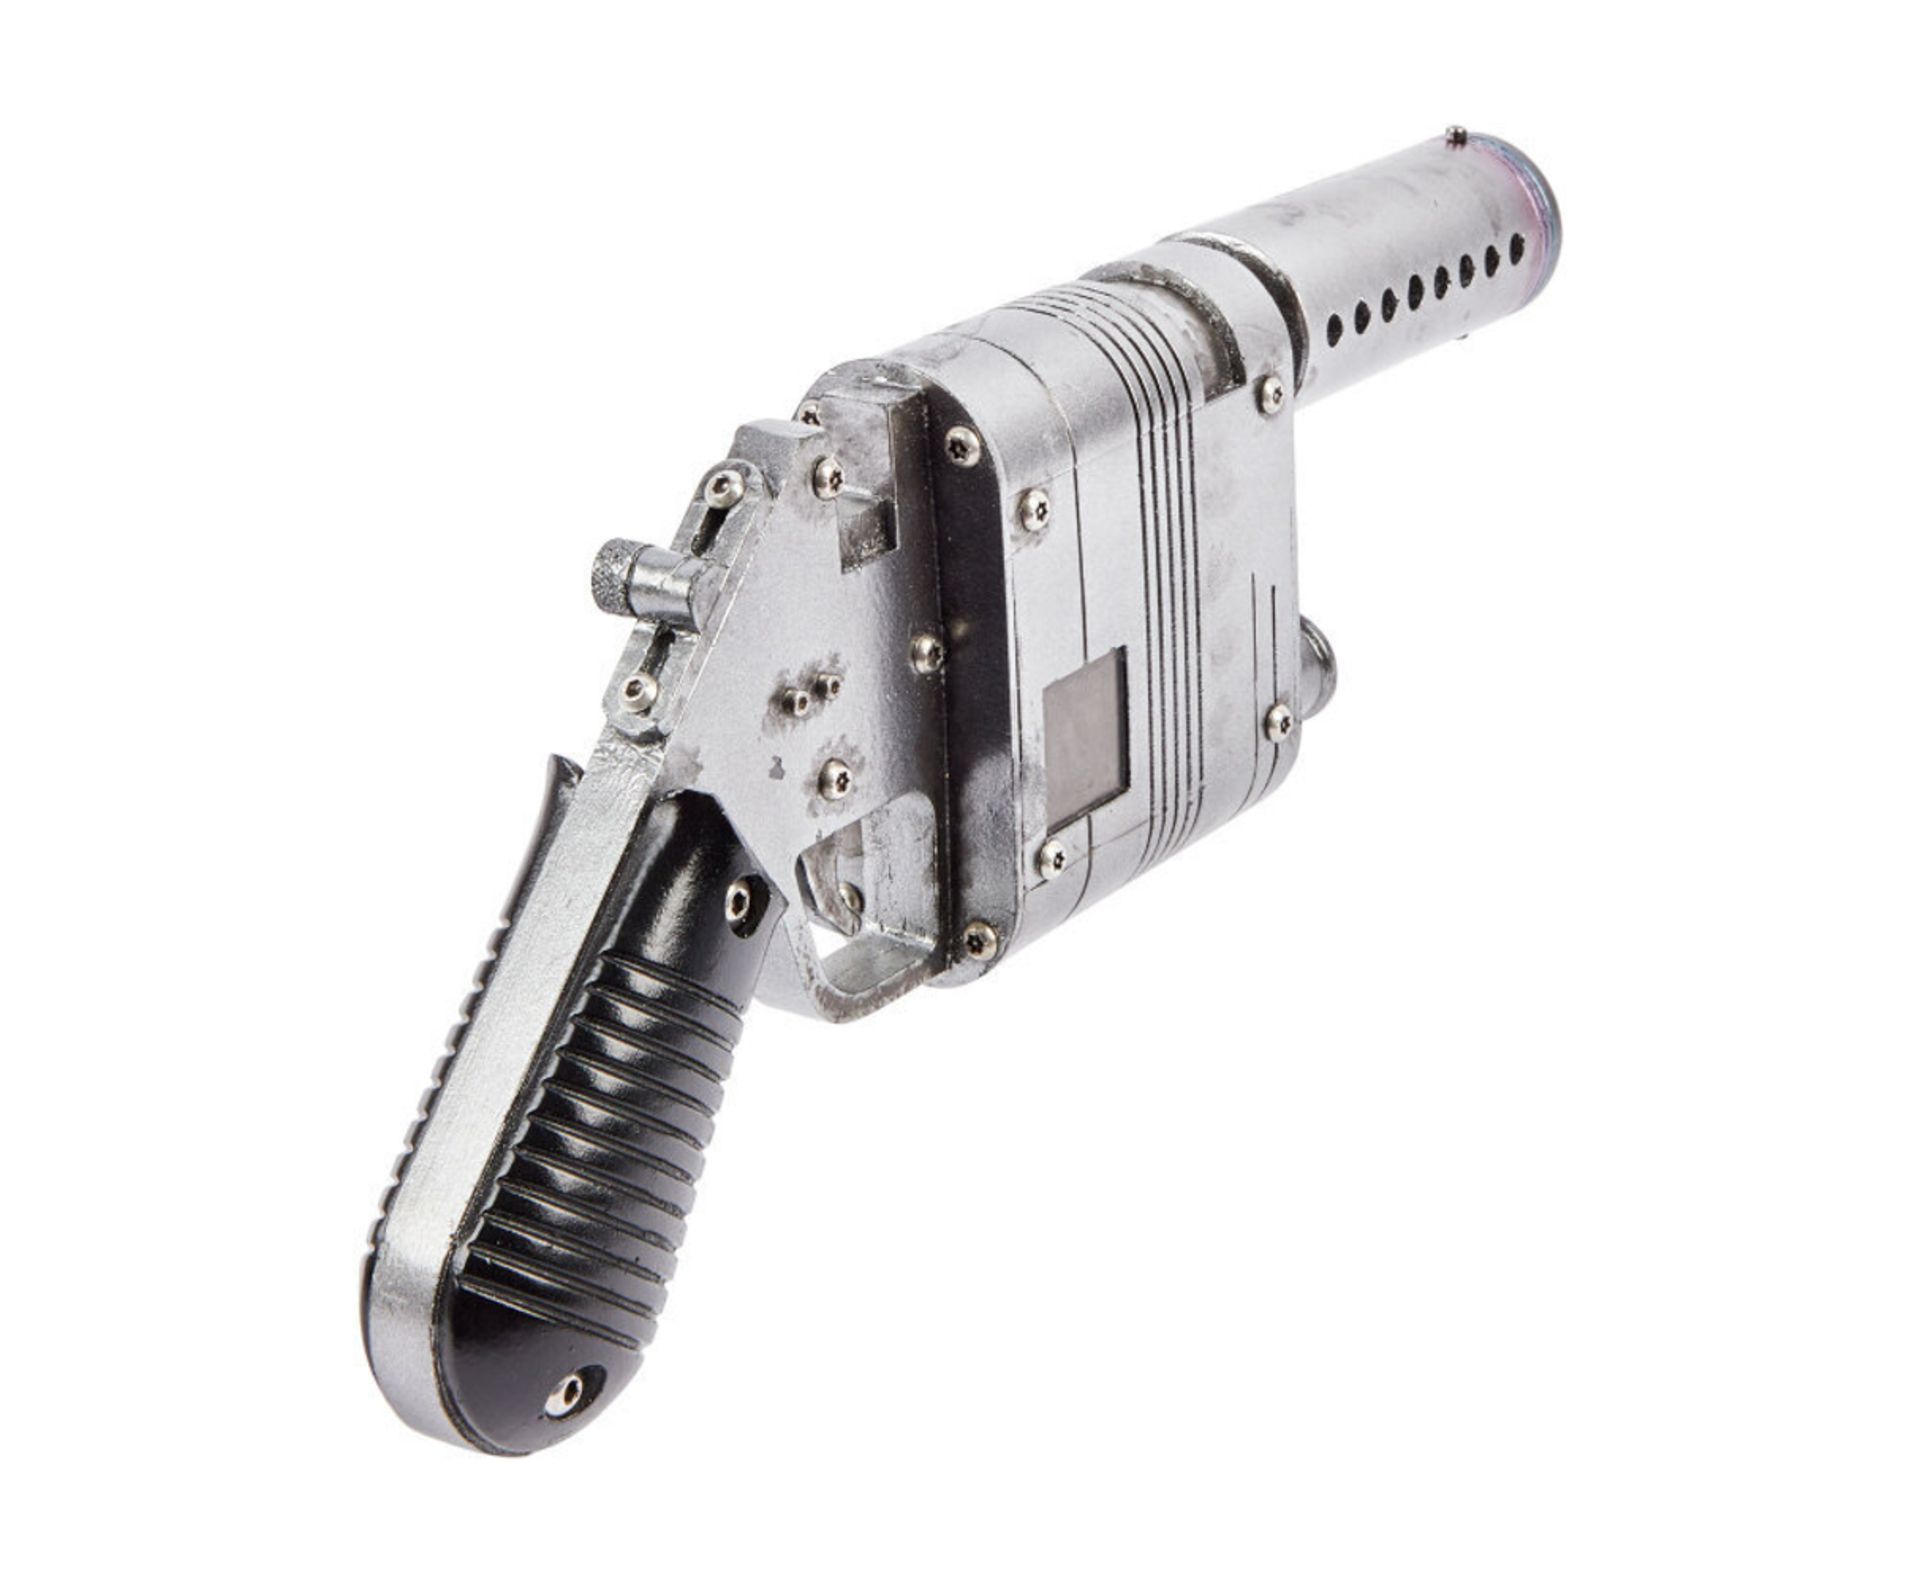 STAR WARS - THE FORCE AWAKENS | DAISY RIDLEY "REY" NN-14 BLASTER PROP (WITH DVD) - Image 5 of 15